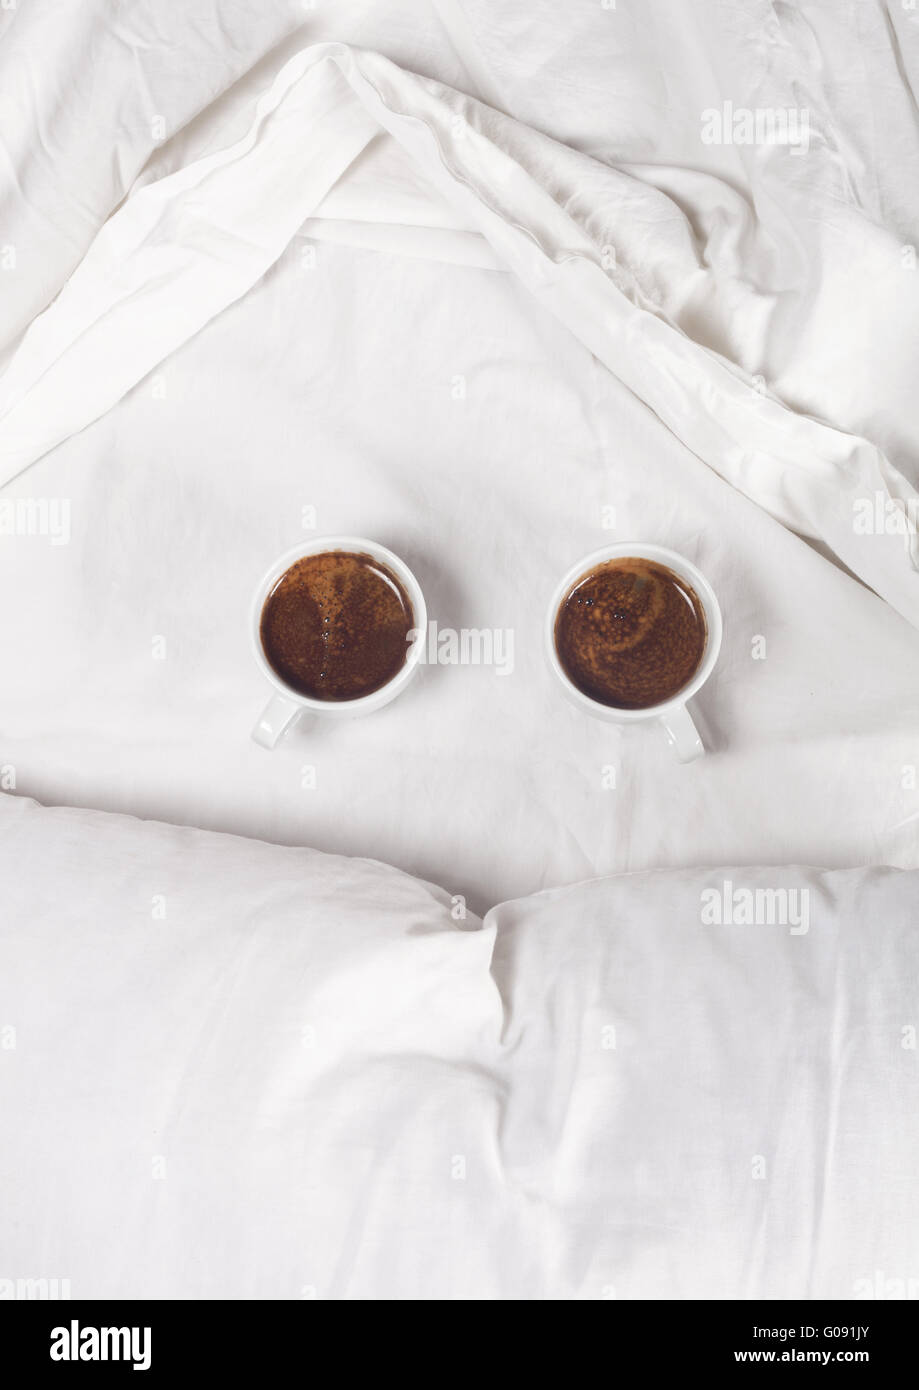 Coffee in Bed Stock Photo